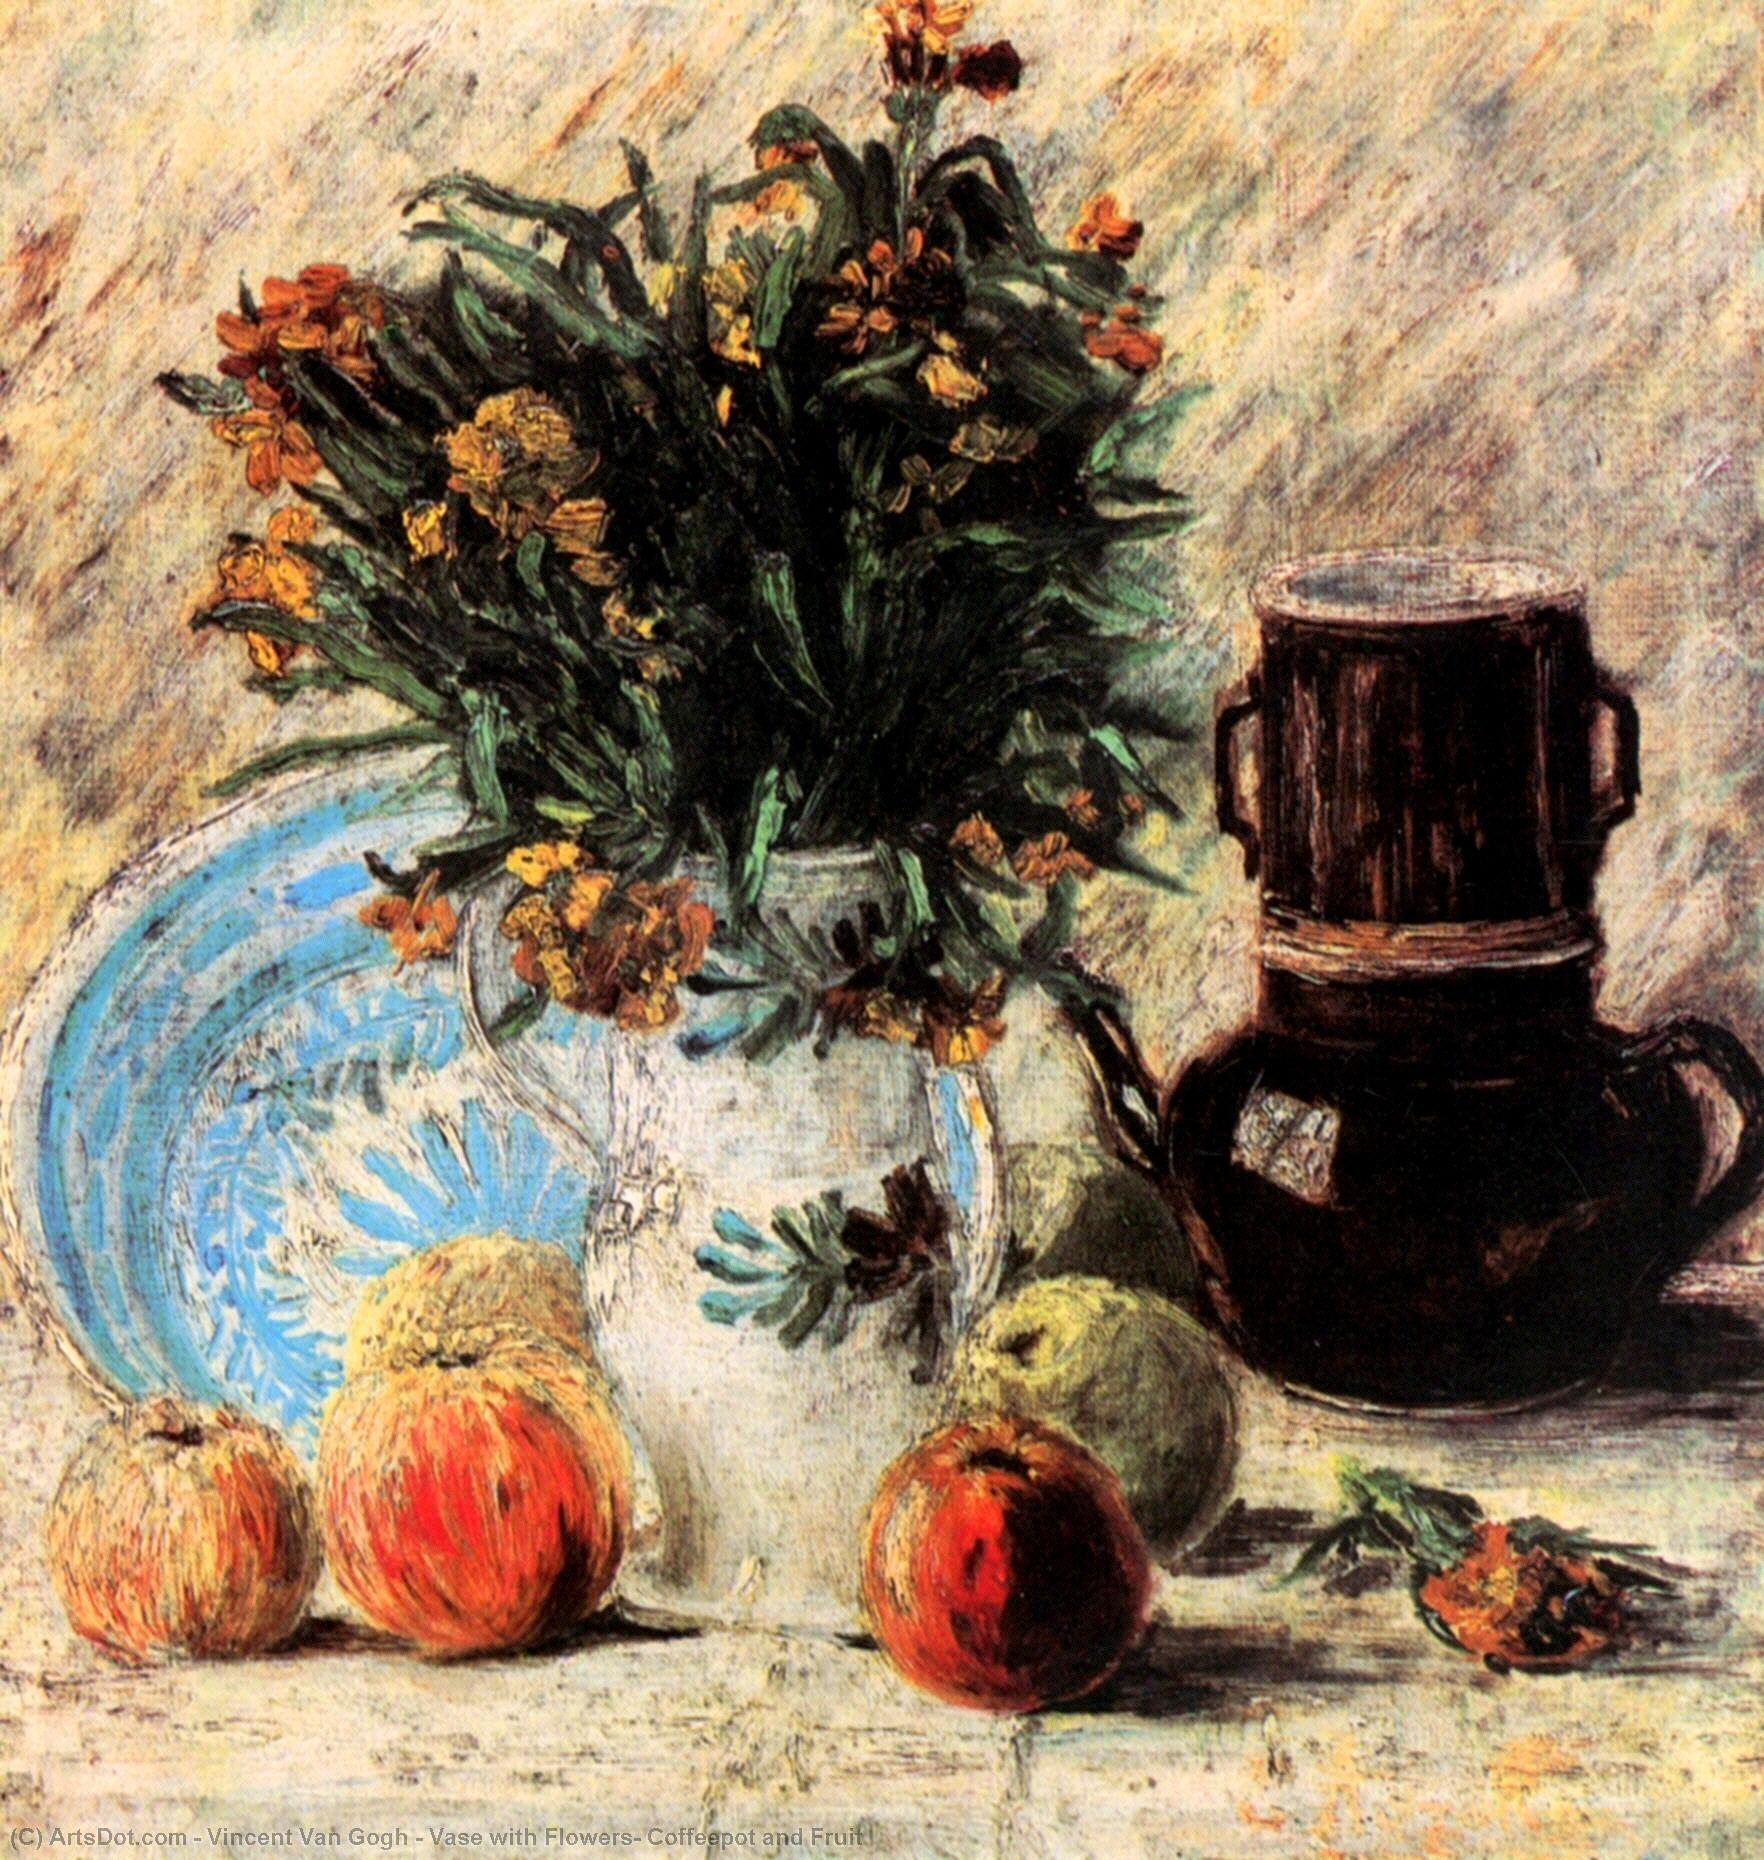 WikiOO.org - Encyclopedia of Fine Arts - Malba, Artwork Vincent Van Gogh - Vase with Flowers, Coffeepot and Fruit